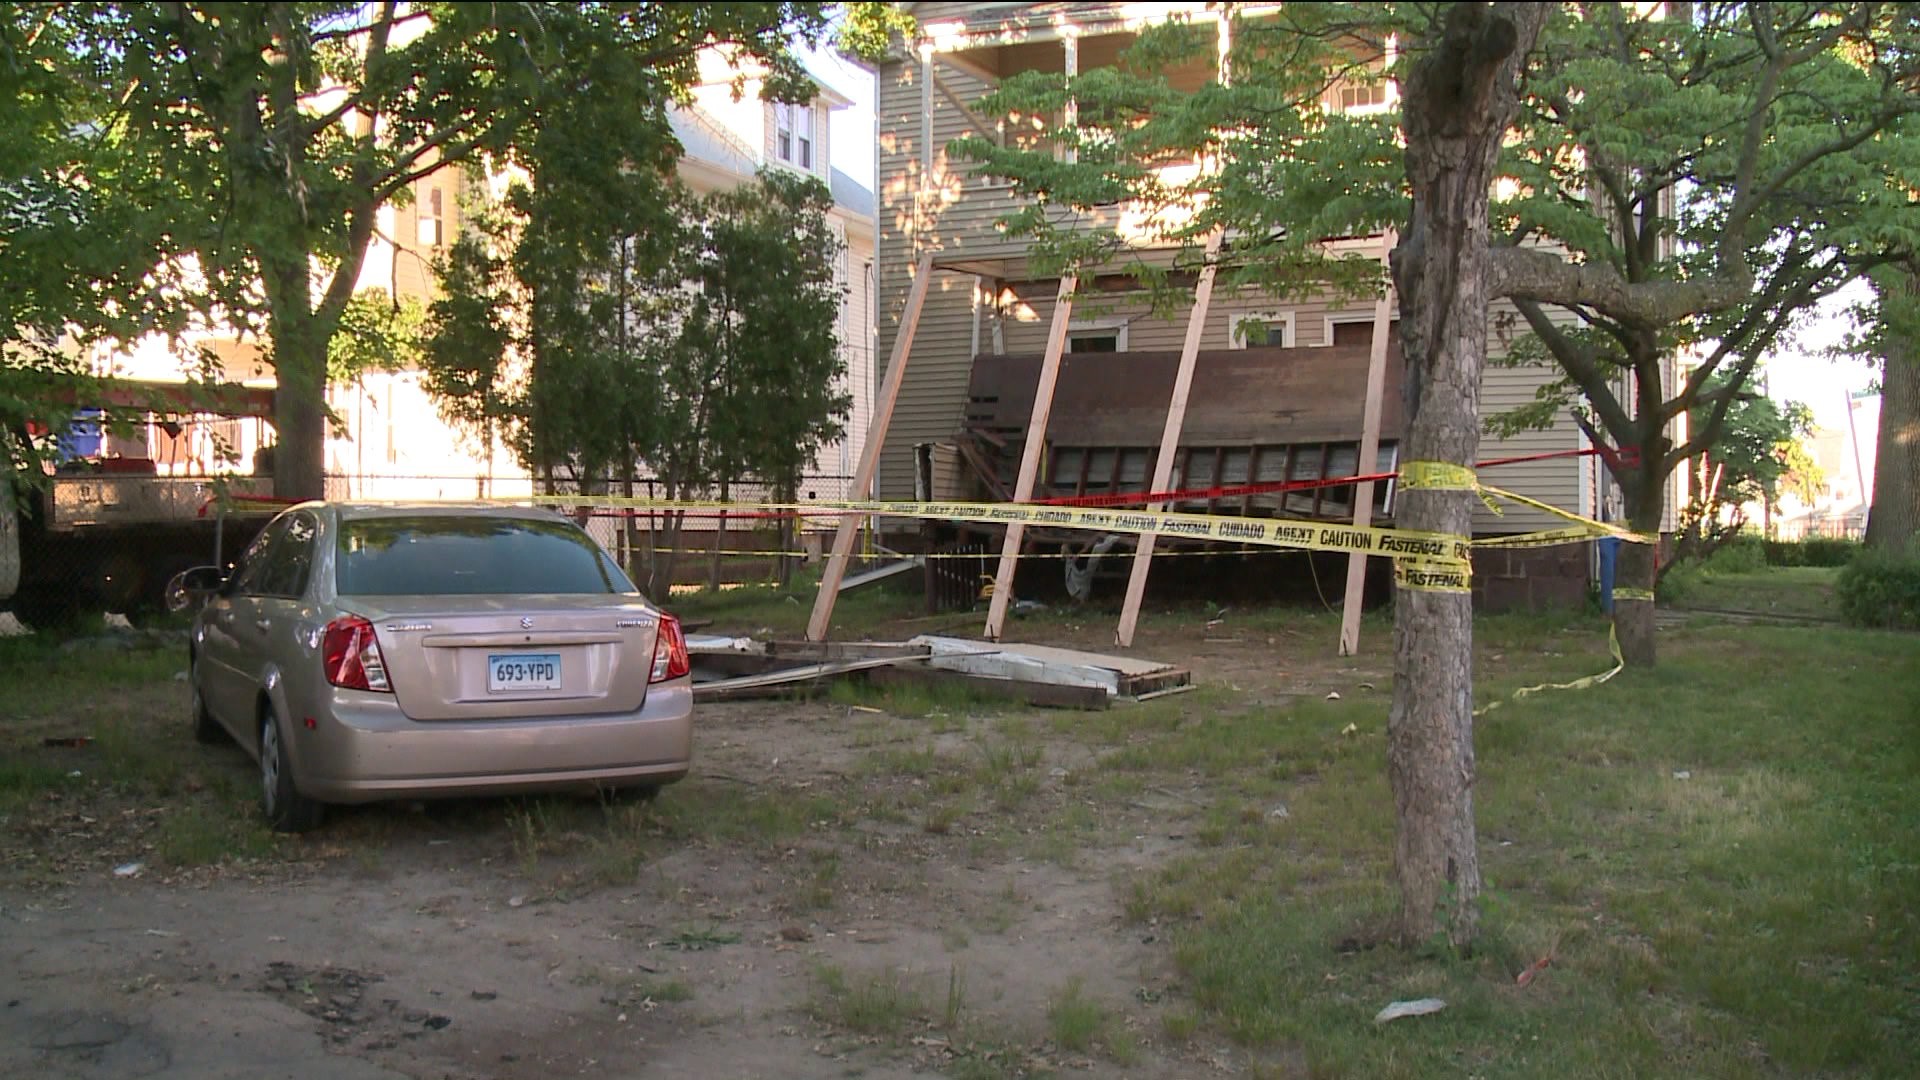 911 tape released on collapsed porch